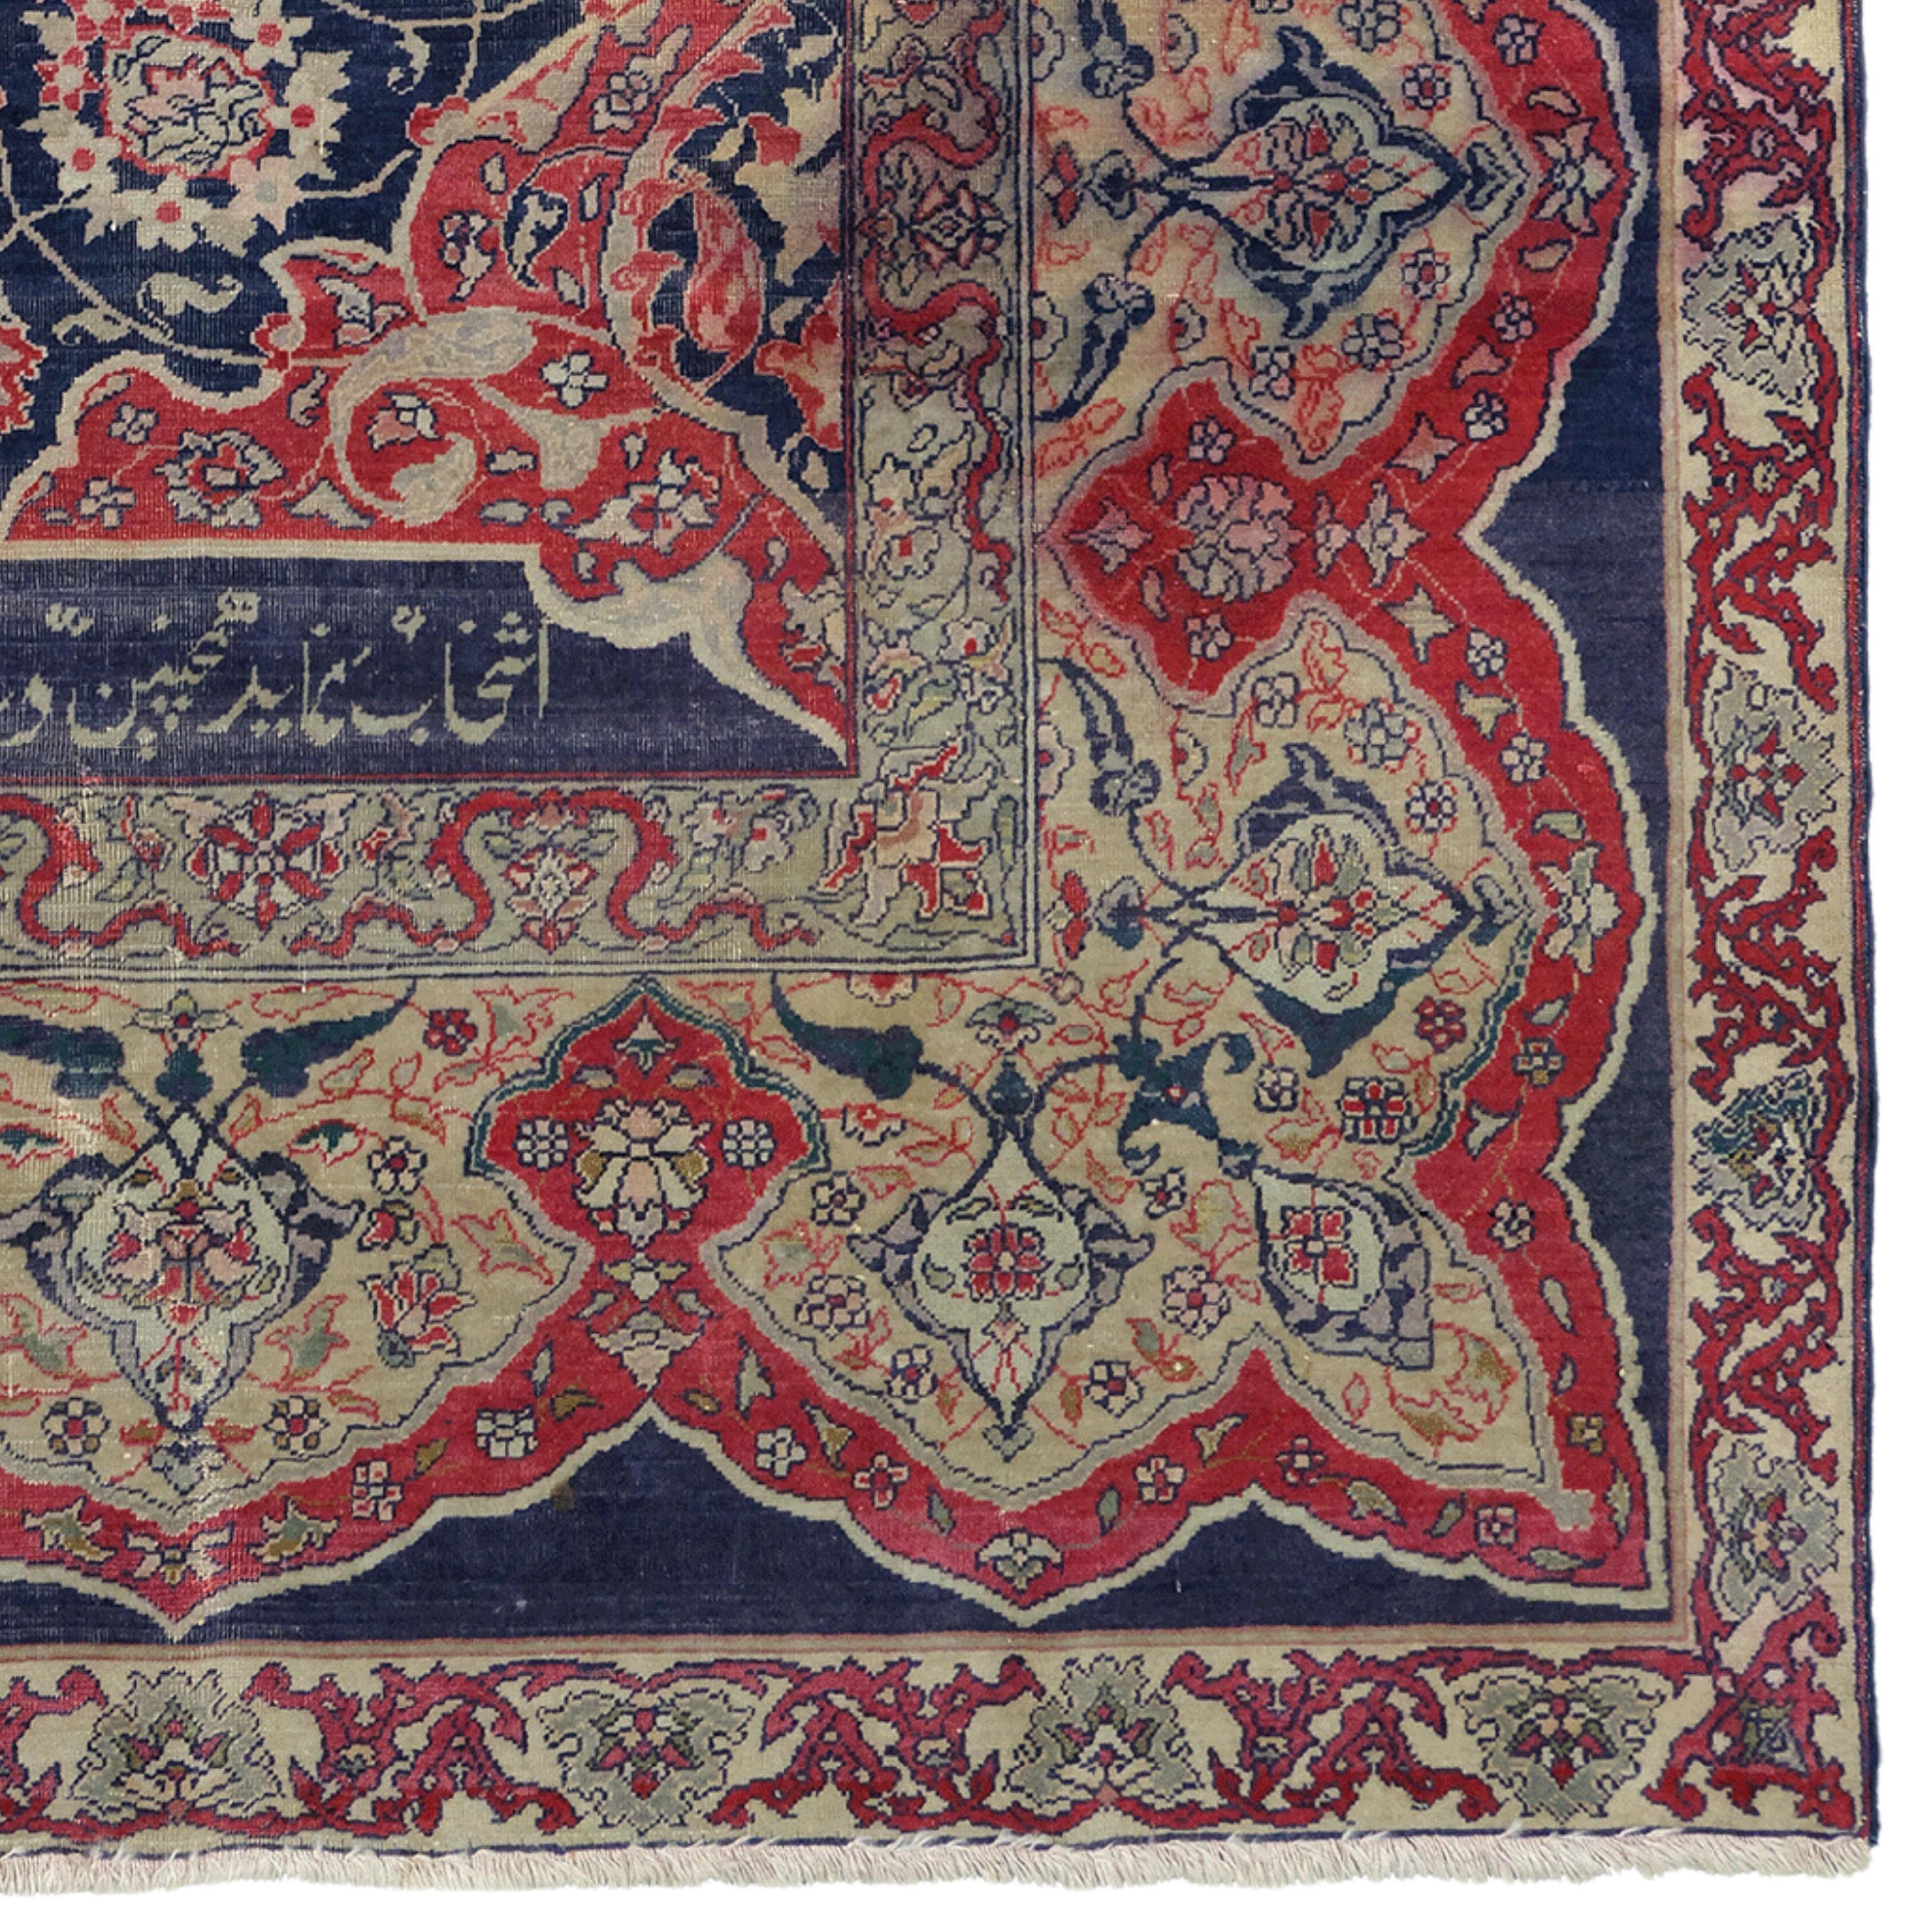 Wool Antique Signed Feshane Rug - Late 19th Century Ottoman Period Signed Feshane Rug For Sale